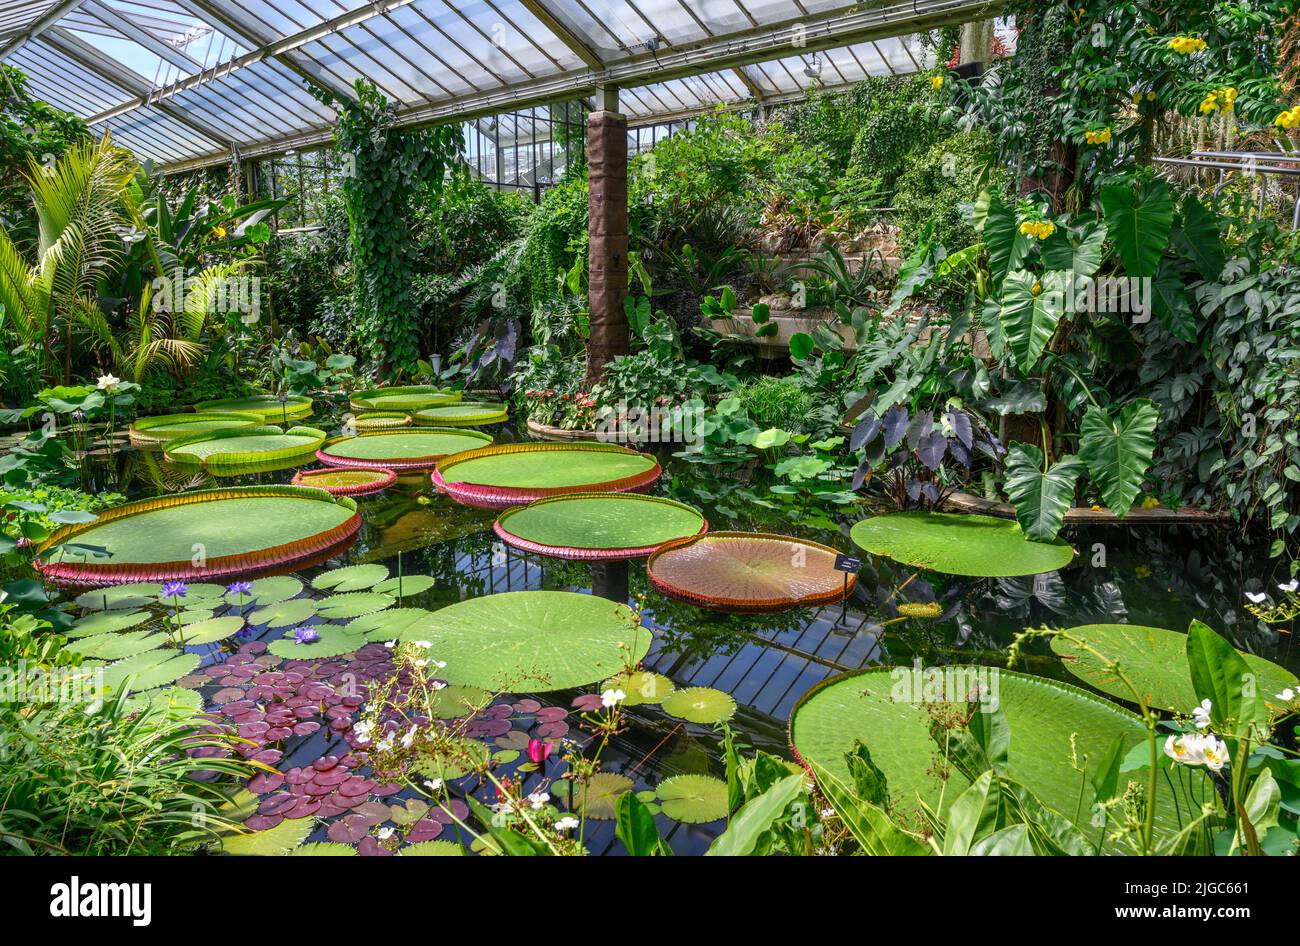 Giant Water Lilies (victoria amazonica), Princess of Wales Conservatory, Kew Gardens, Richmond, Londres, Angleterre, ROYAUME-UNI Banque D'Images